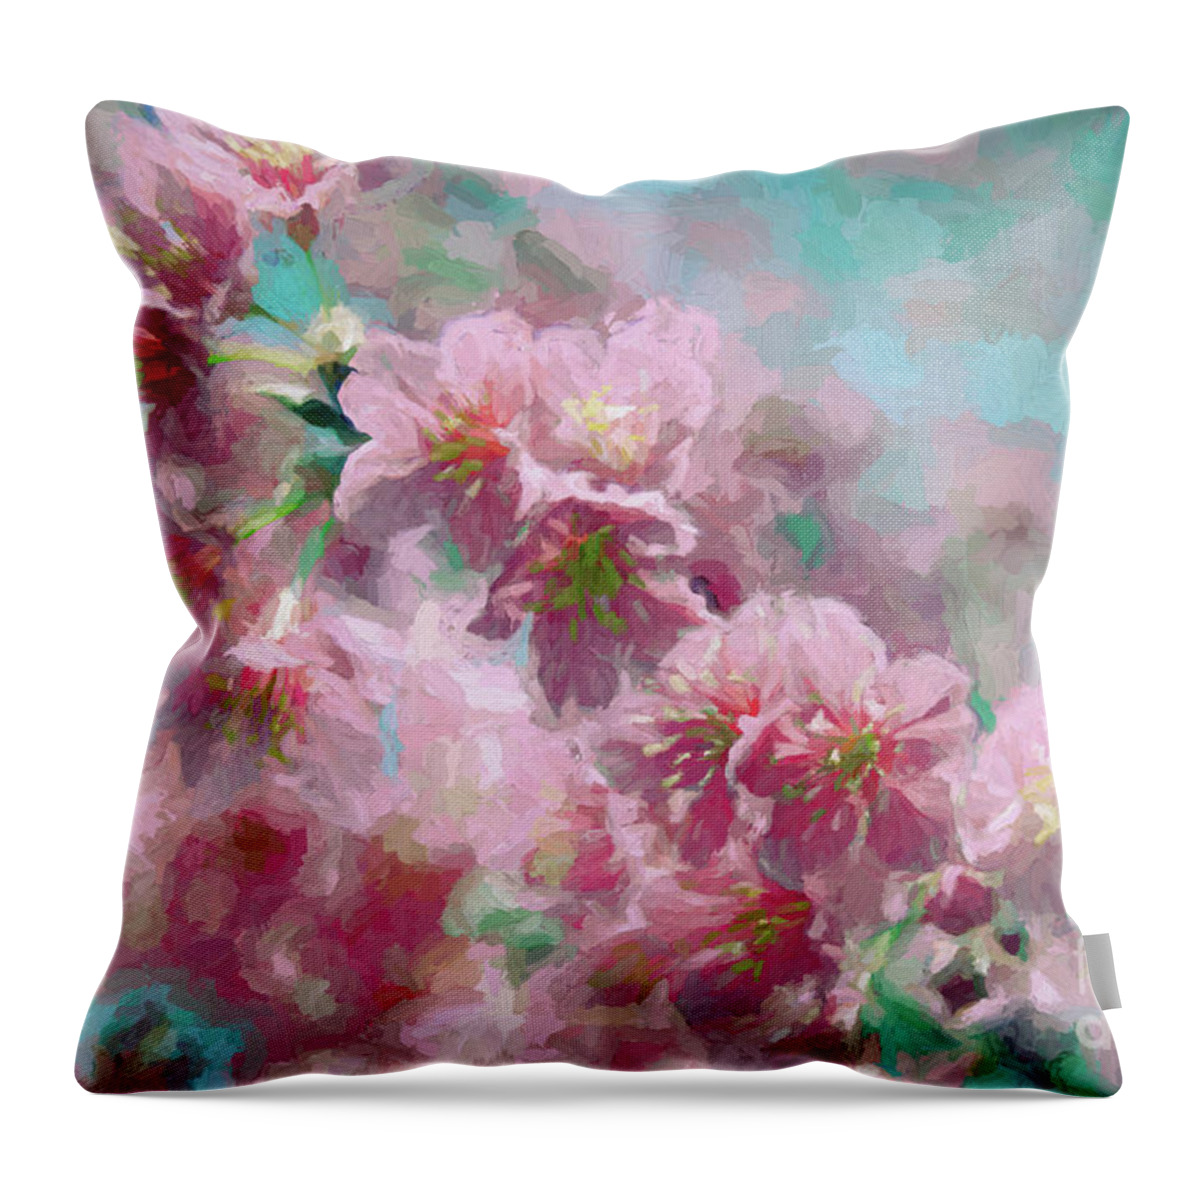 Pink Throw Pillow featuring the mixed media Plum Blossom - Bring on Spring Series #1 by Andrea Anderegg